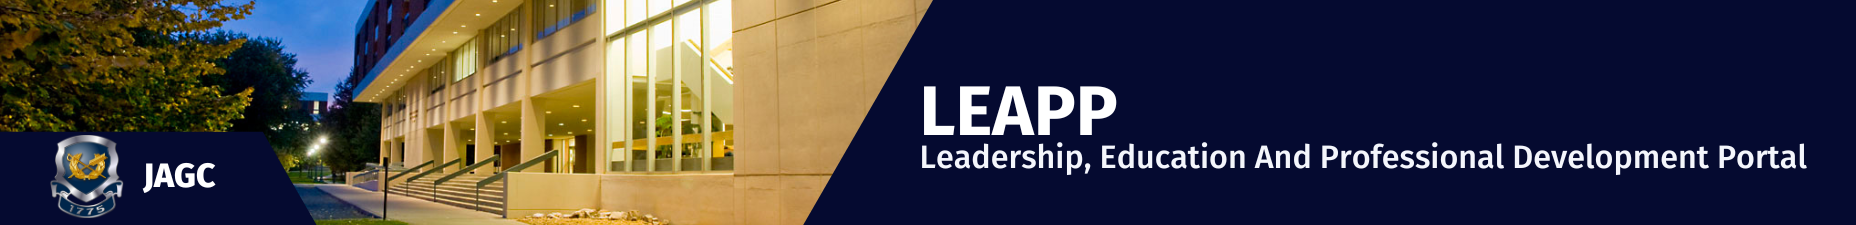 Leadership, Education and Profressional Development Portal Banner